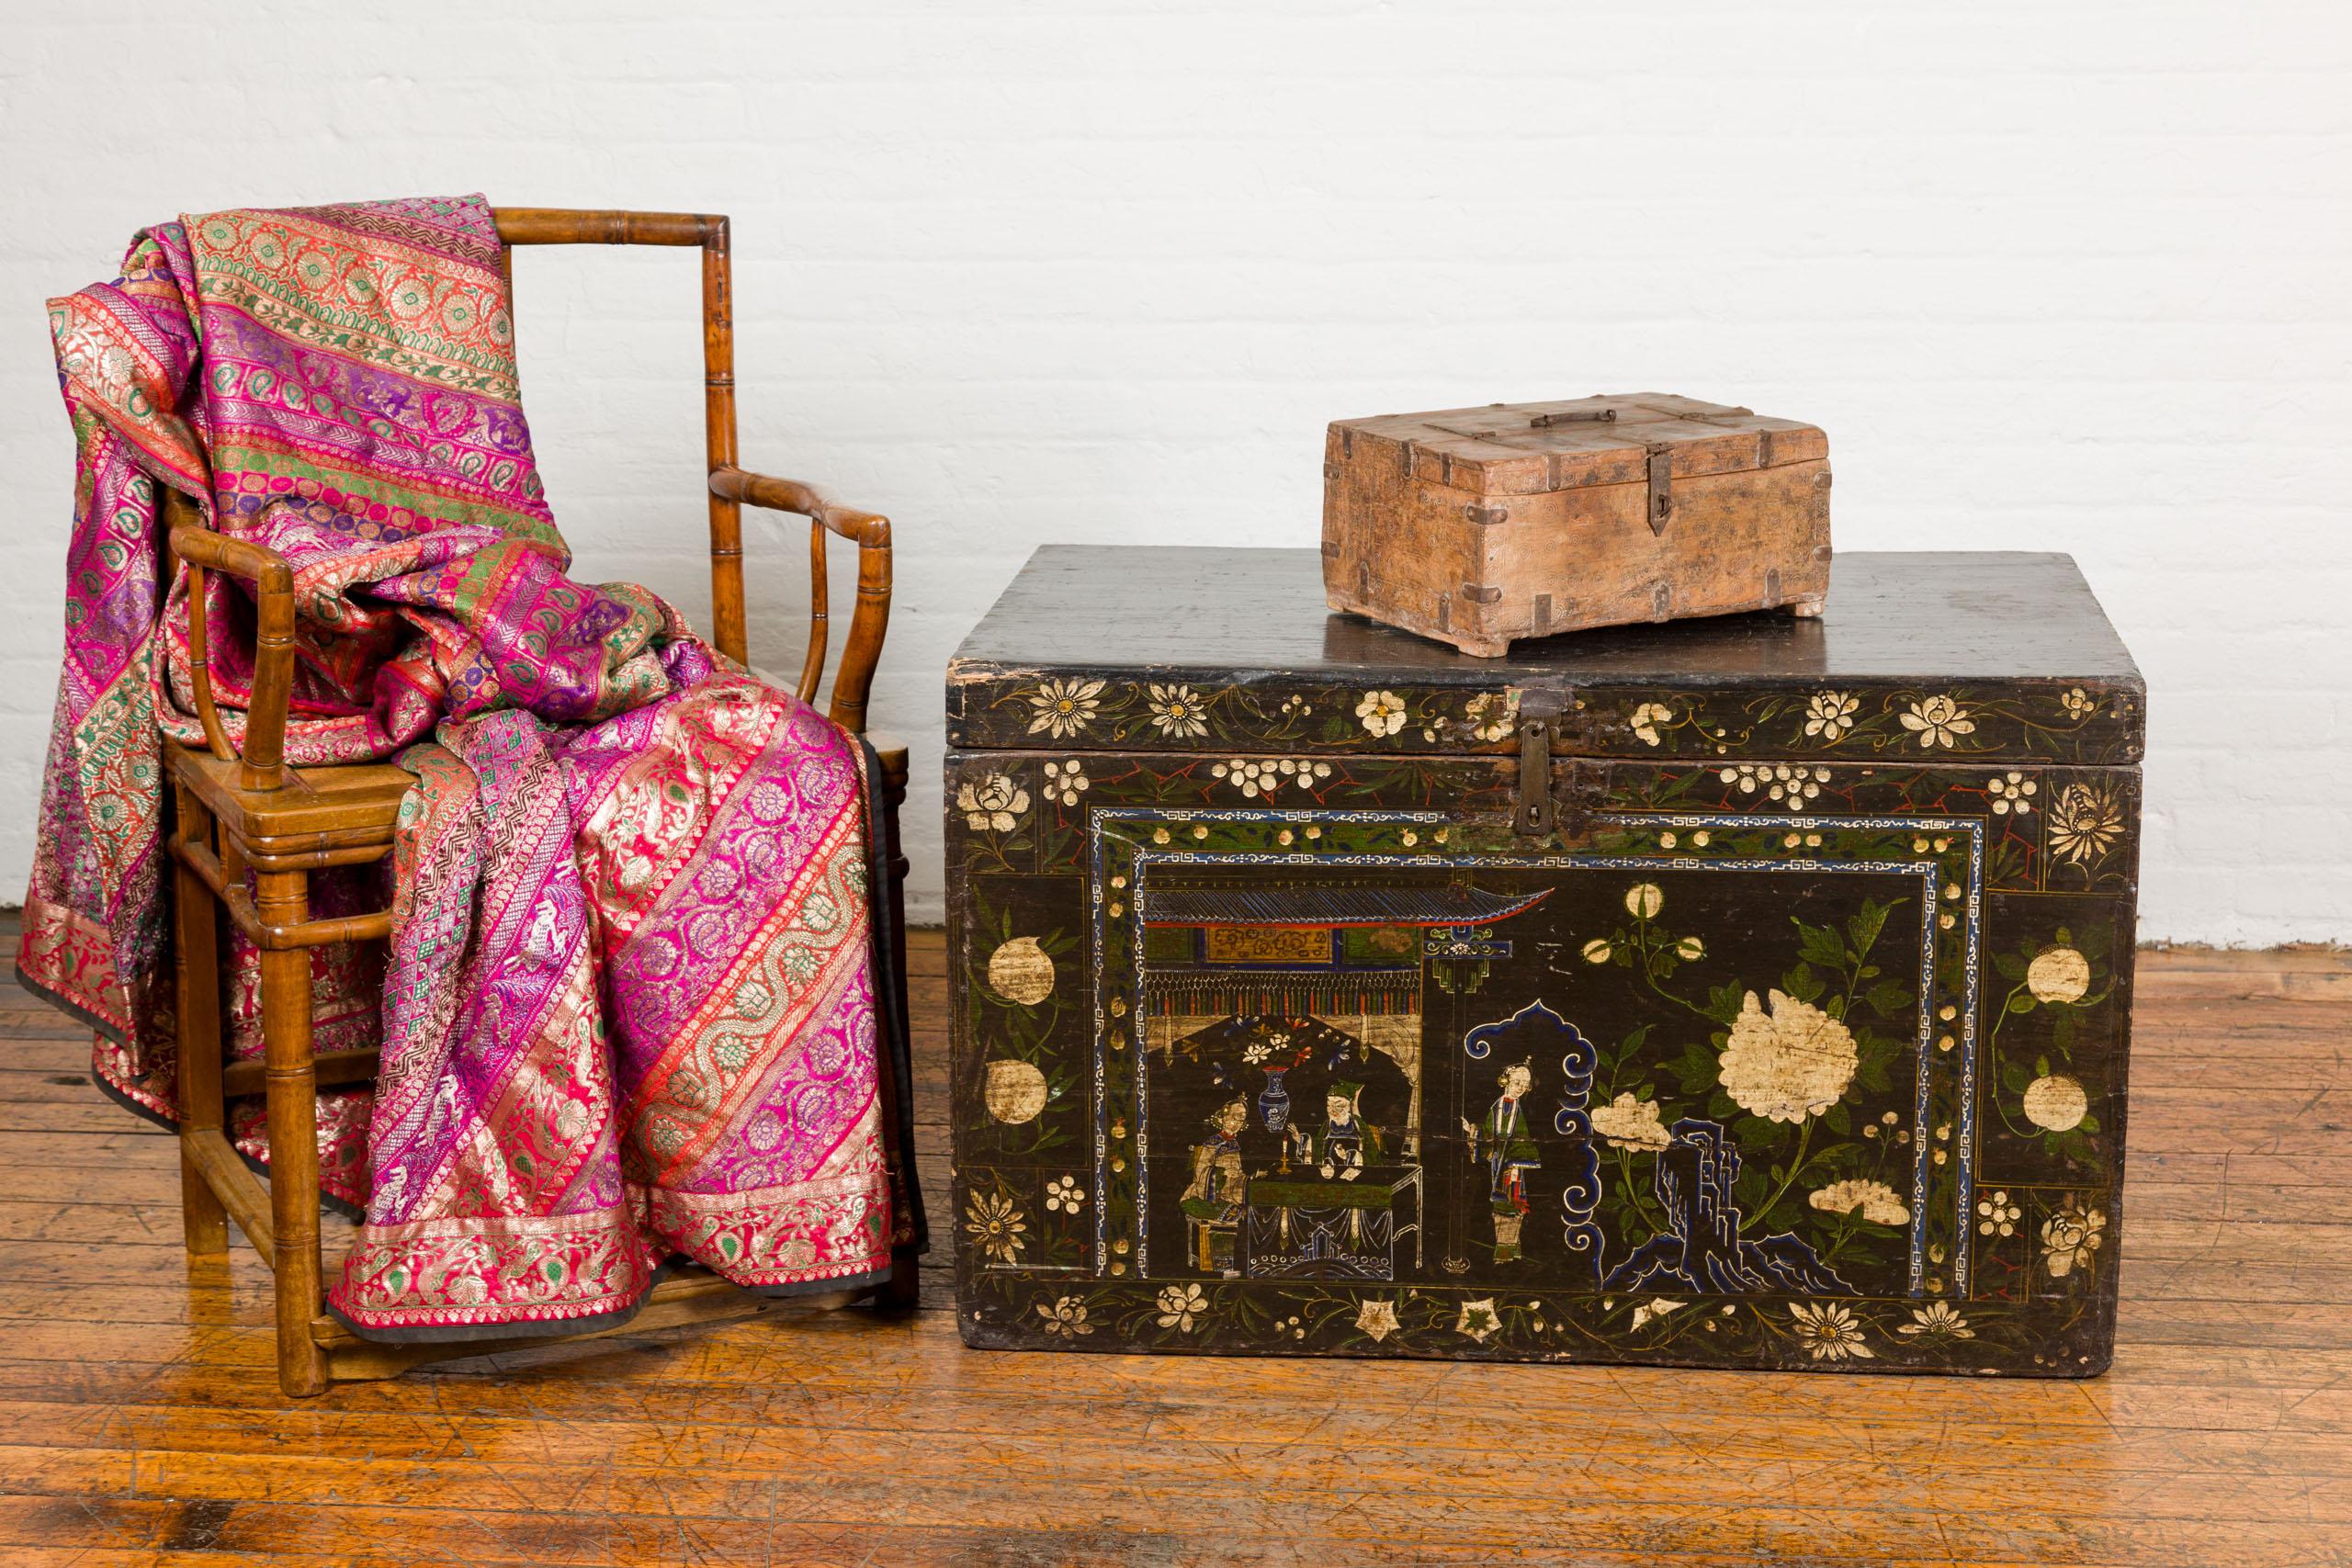 An Indian wooden document box from the 19th century with incised concentric circle motifs, metal braces and partial opening top. Discover the charm of history with this exquisite 19th-century Indian wooden document box, a statement piece that